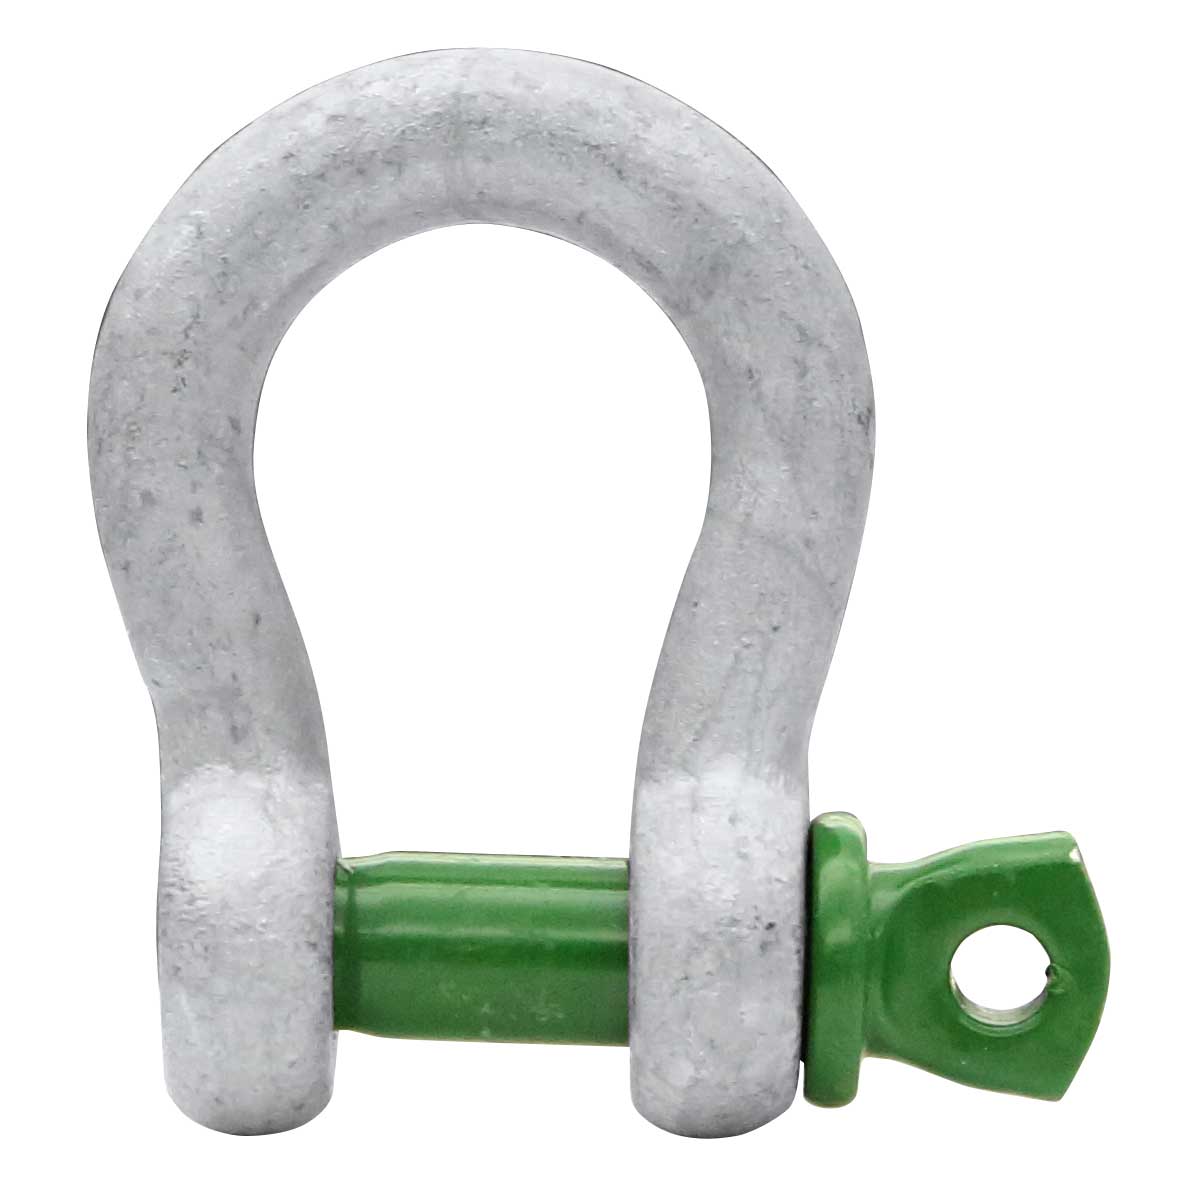 1-1/2" Van Beest Green Pin® Screw Pin Anchor Shackle | G-4161 - 17 Ton primary image